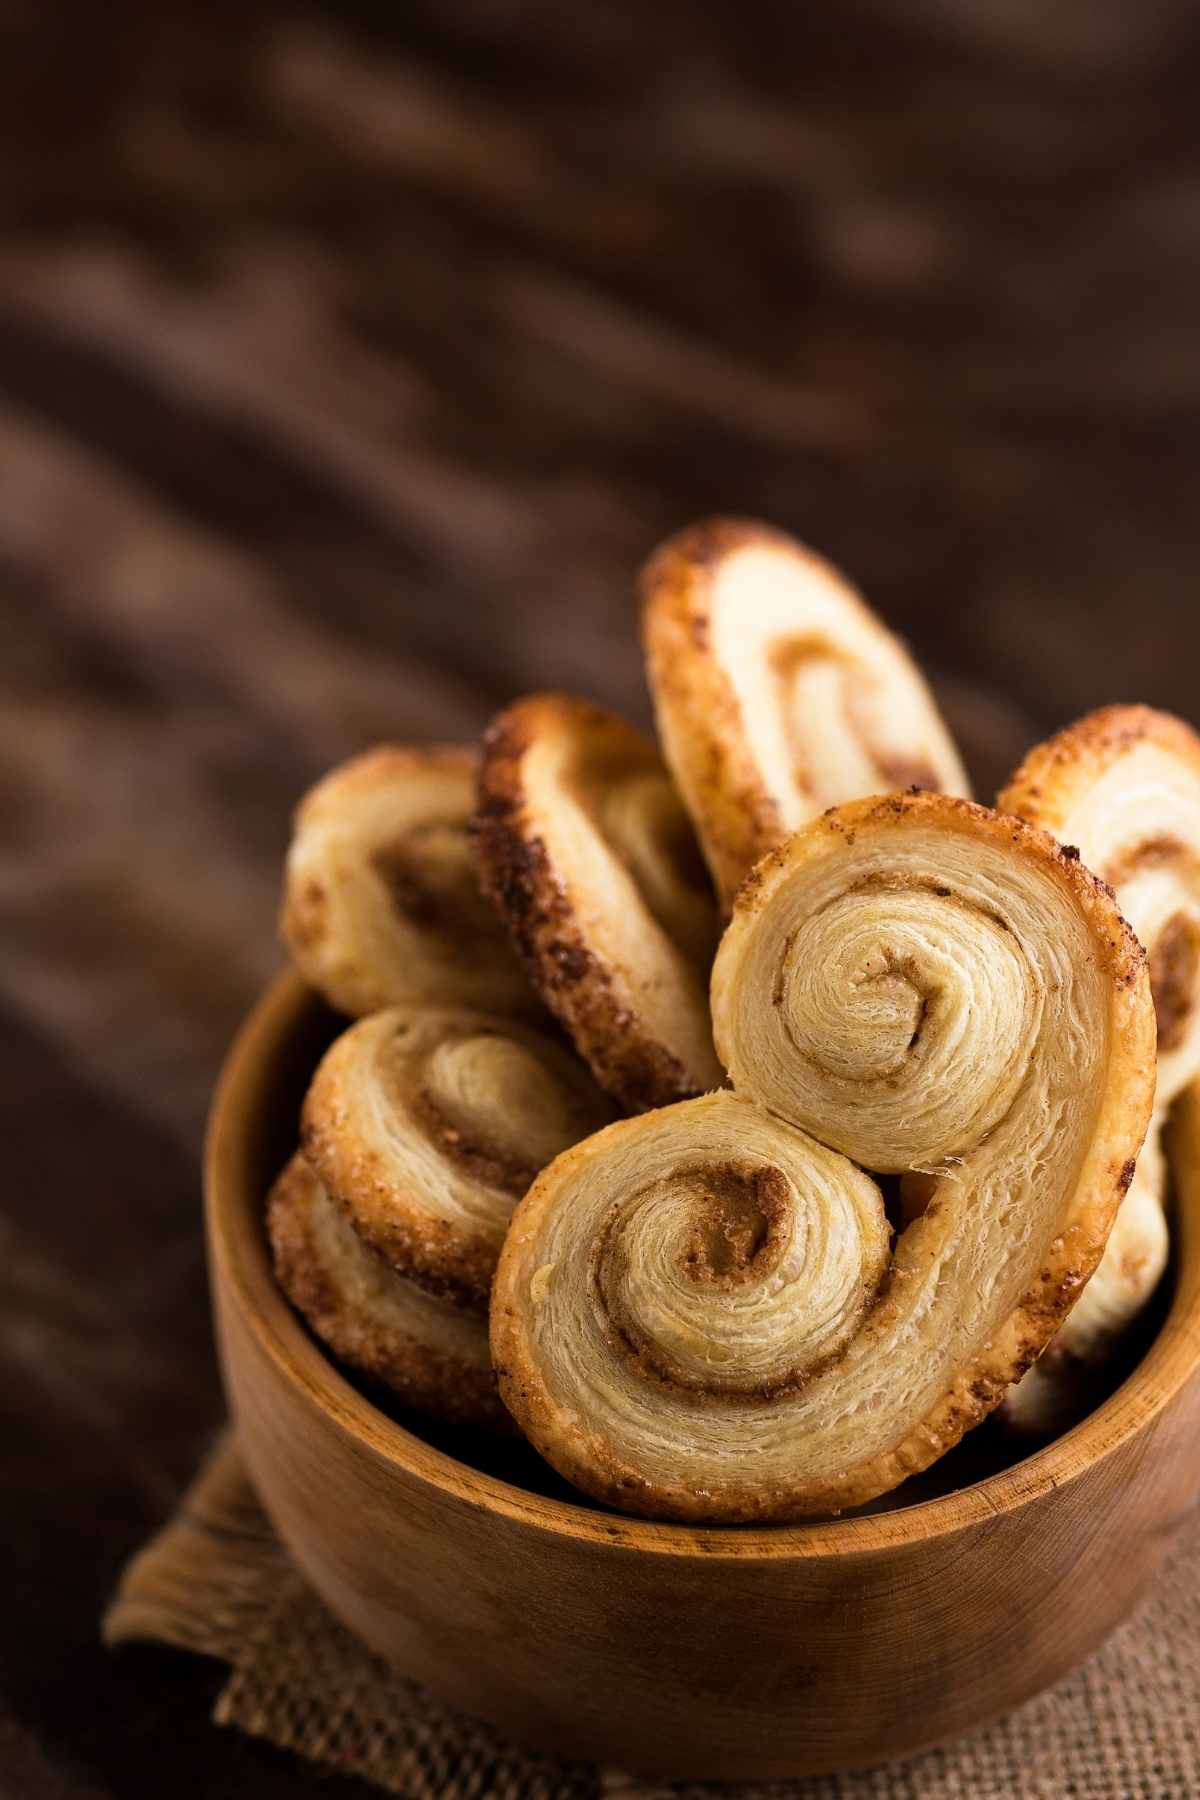 French Palmier pastry cookies are delicate, flaky, and delicious! They’re made with puffed pastry and are sure to impress your guests.